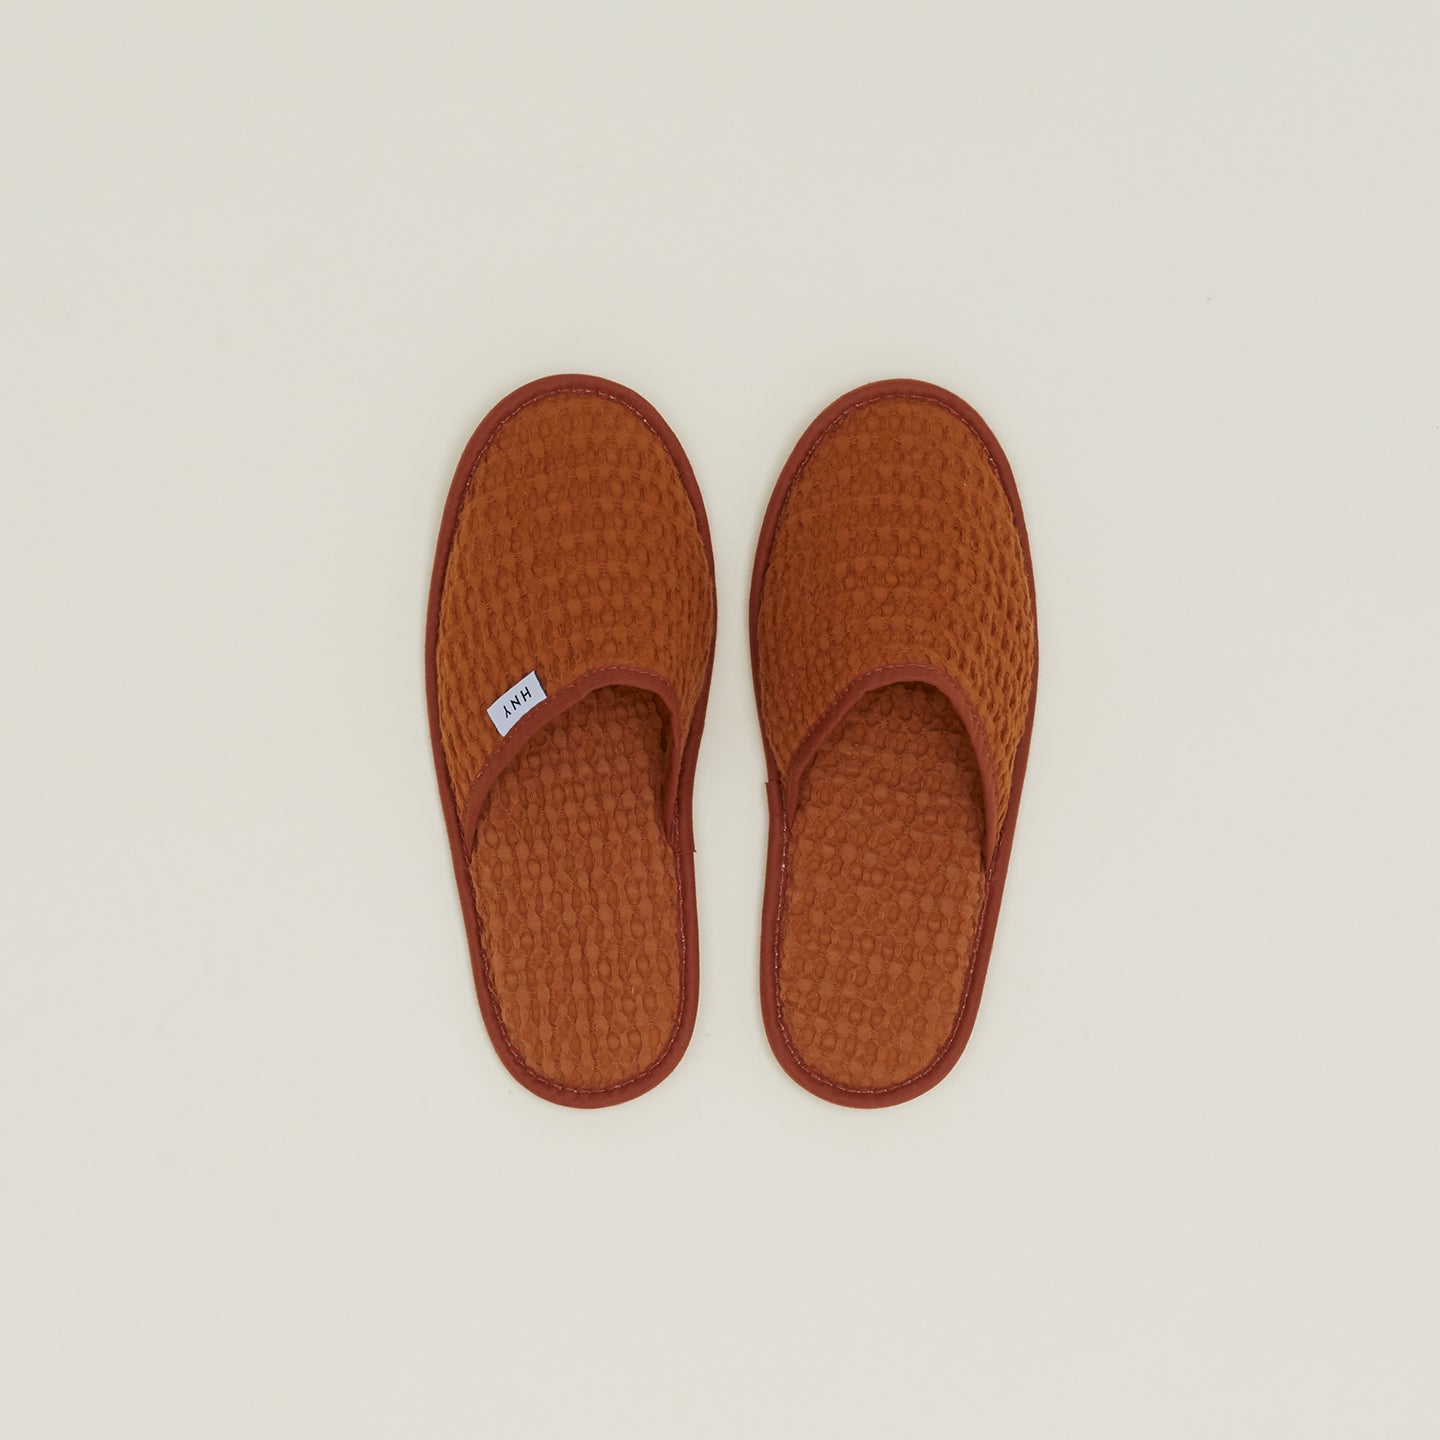 Simple Waffle Slippers - Terracotta